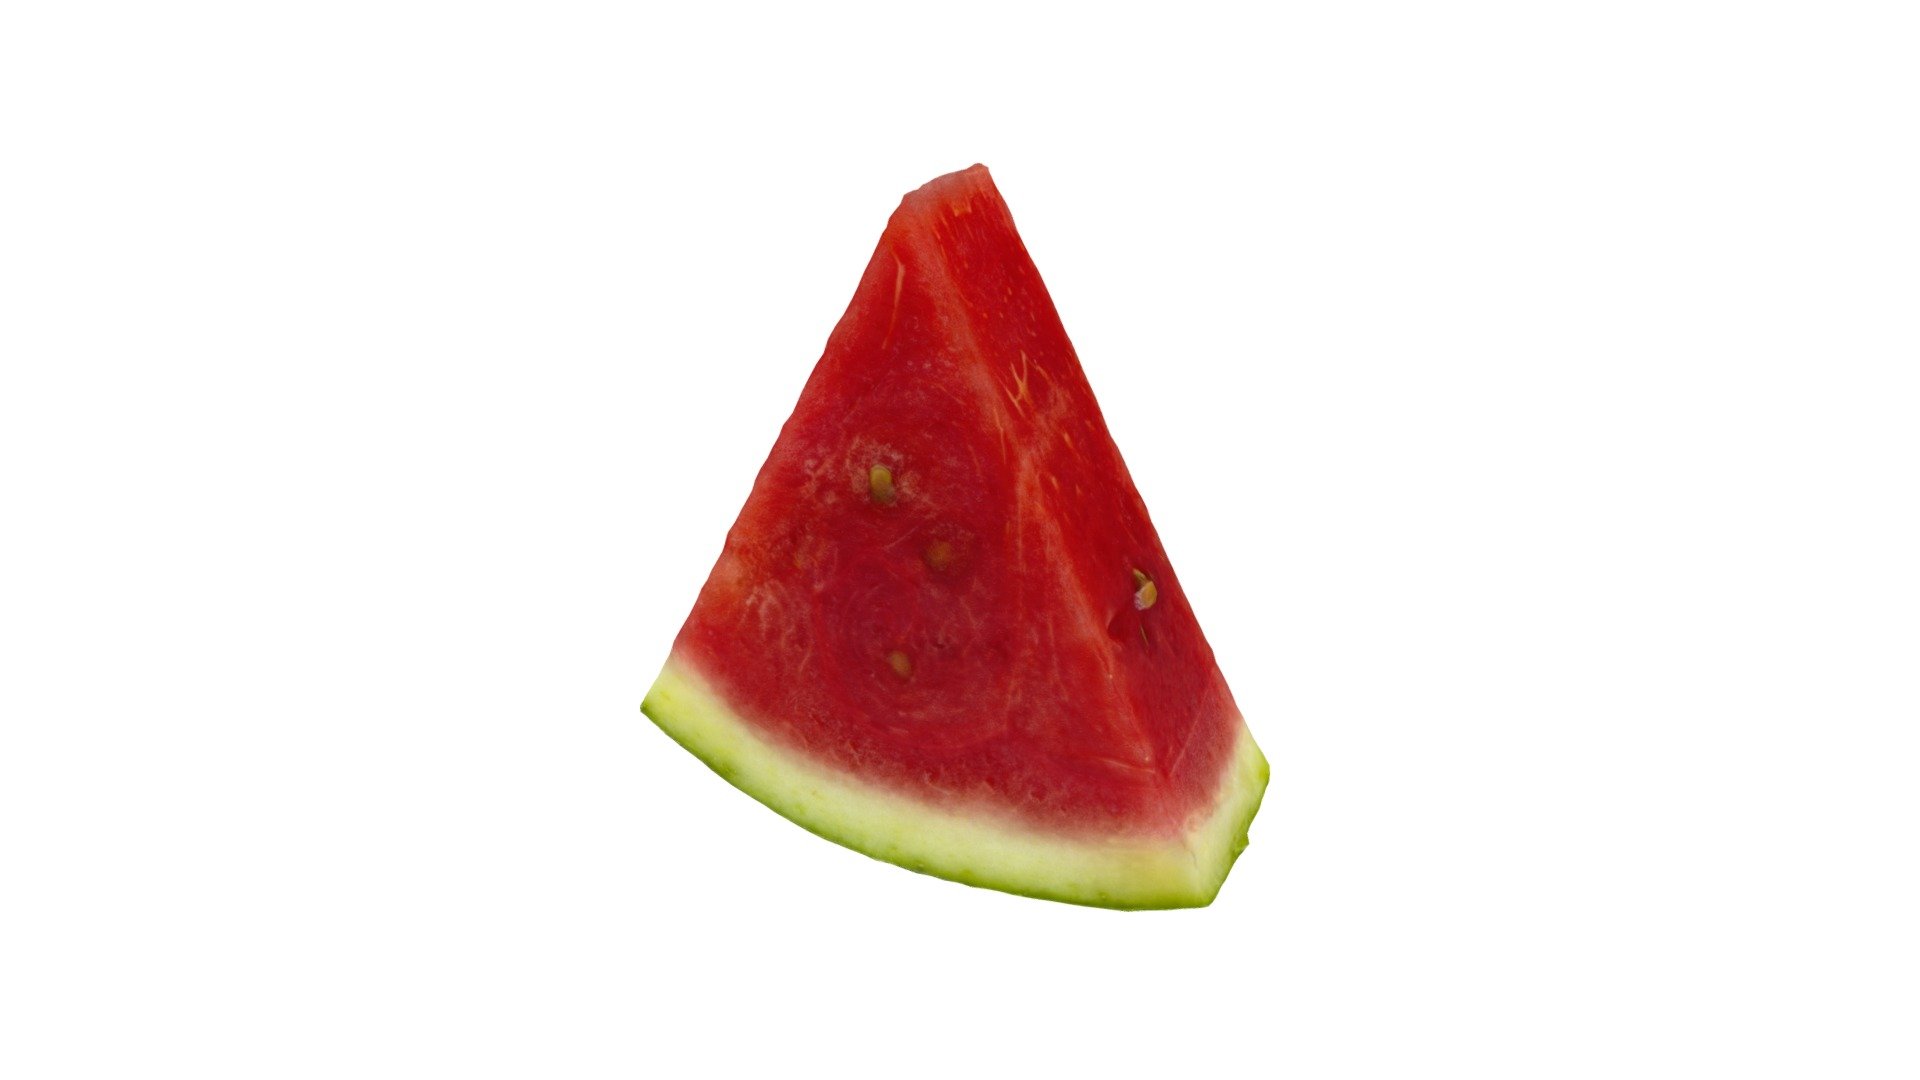 Highly detailed, photorealistic, 3d scanned model of a watermelon slice. 8k textures maps, optimized topology and uv unwrapped.

Model shown here is lowpoly with diffuse map only and 4k texture size.

This model is available at www.thecreativecrops.com 3d model